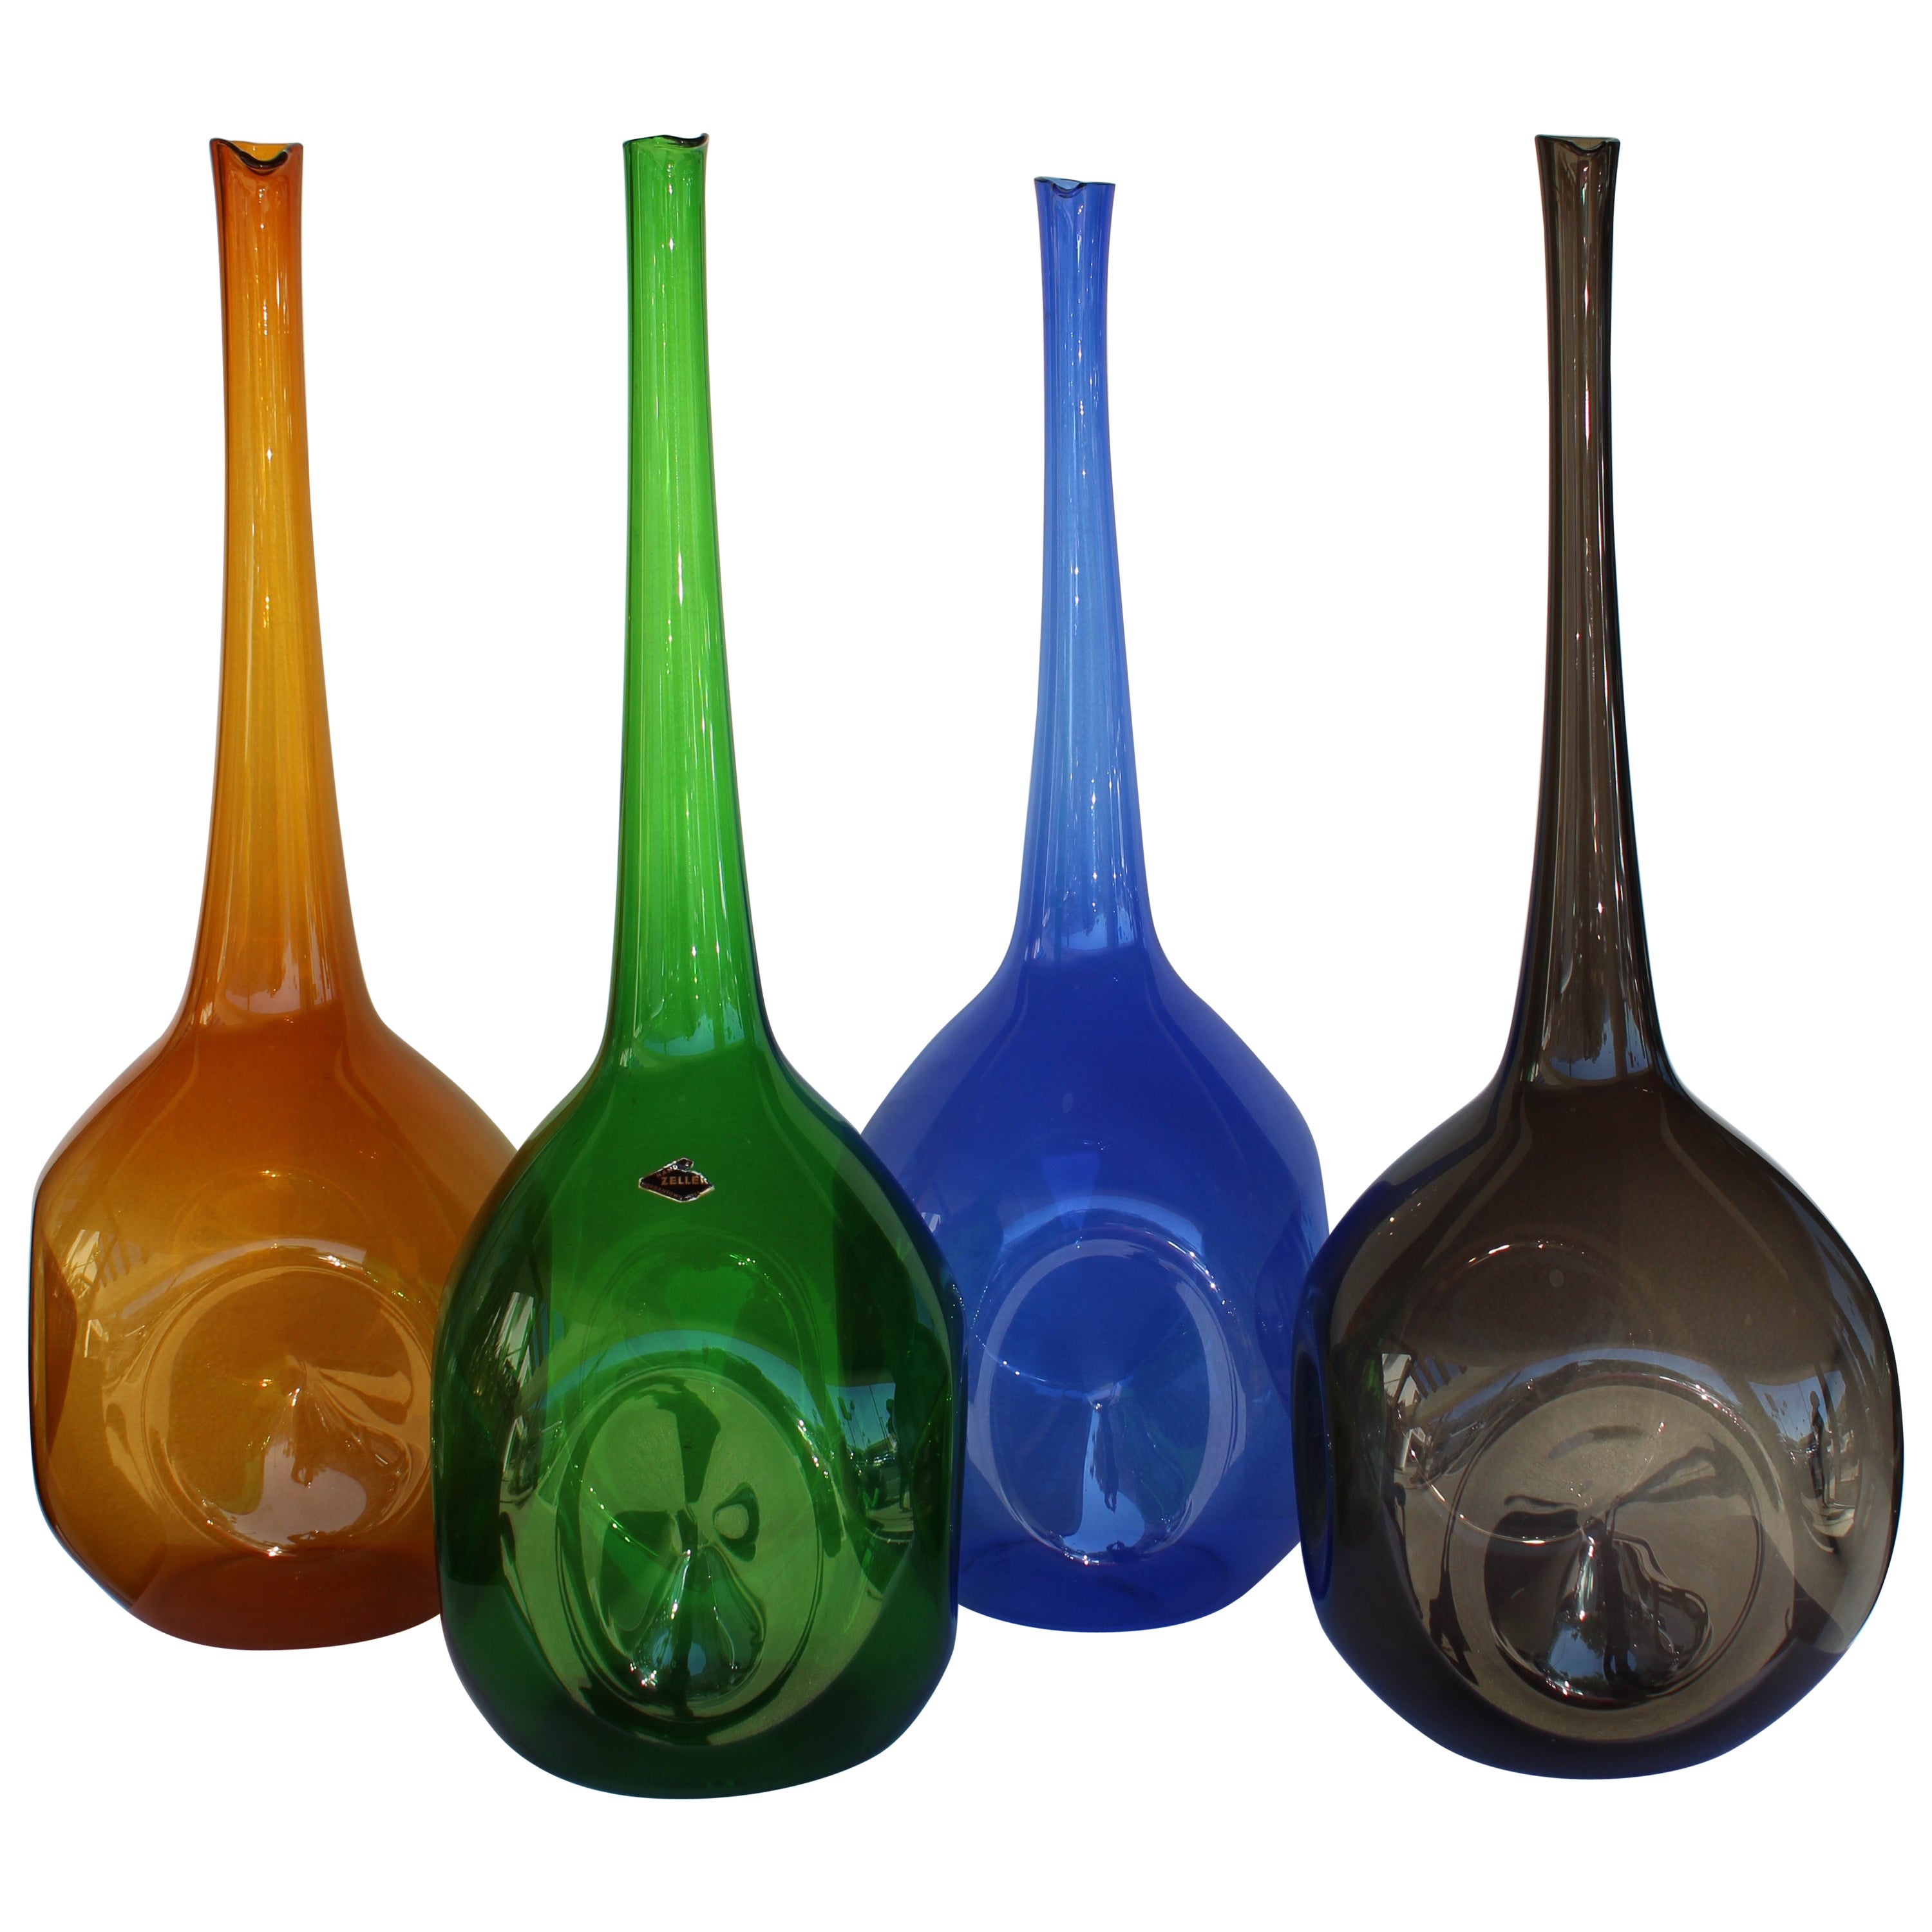 Four Large Hand Blown Glass Vessels by the Zeller Glass Company